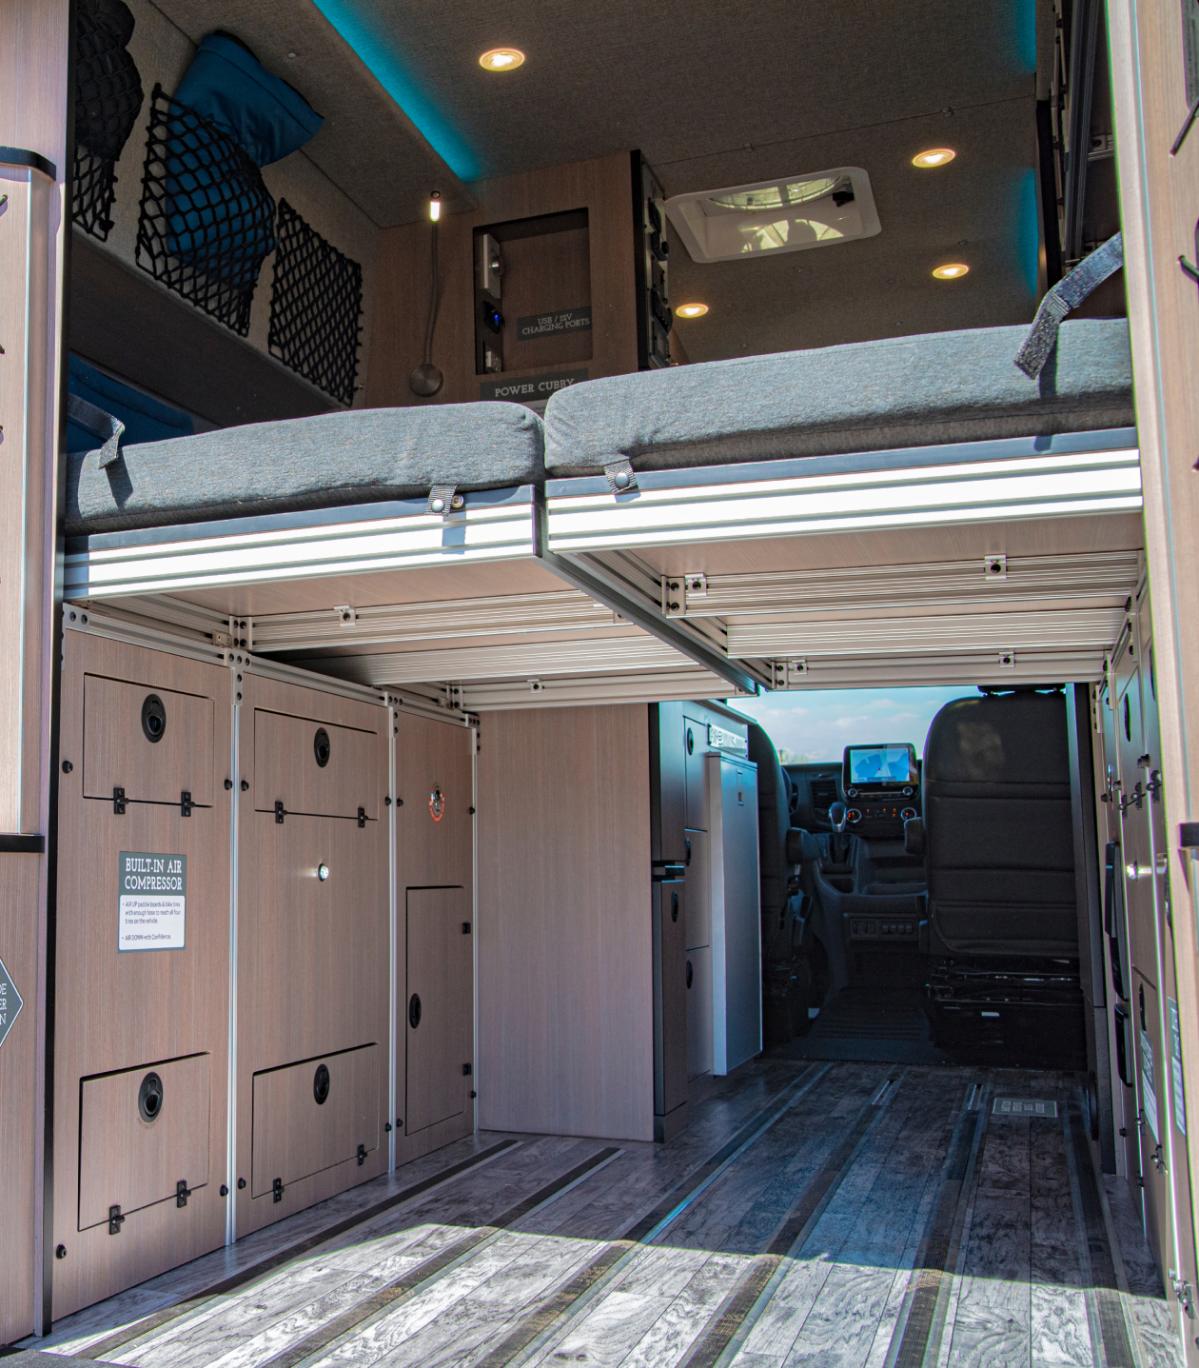 A view of the back interior of an Antero Adventure Van